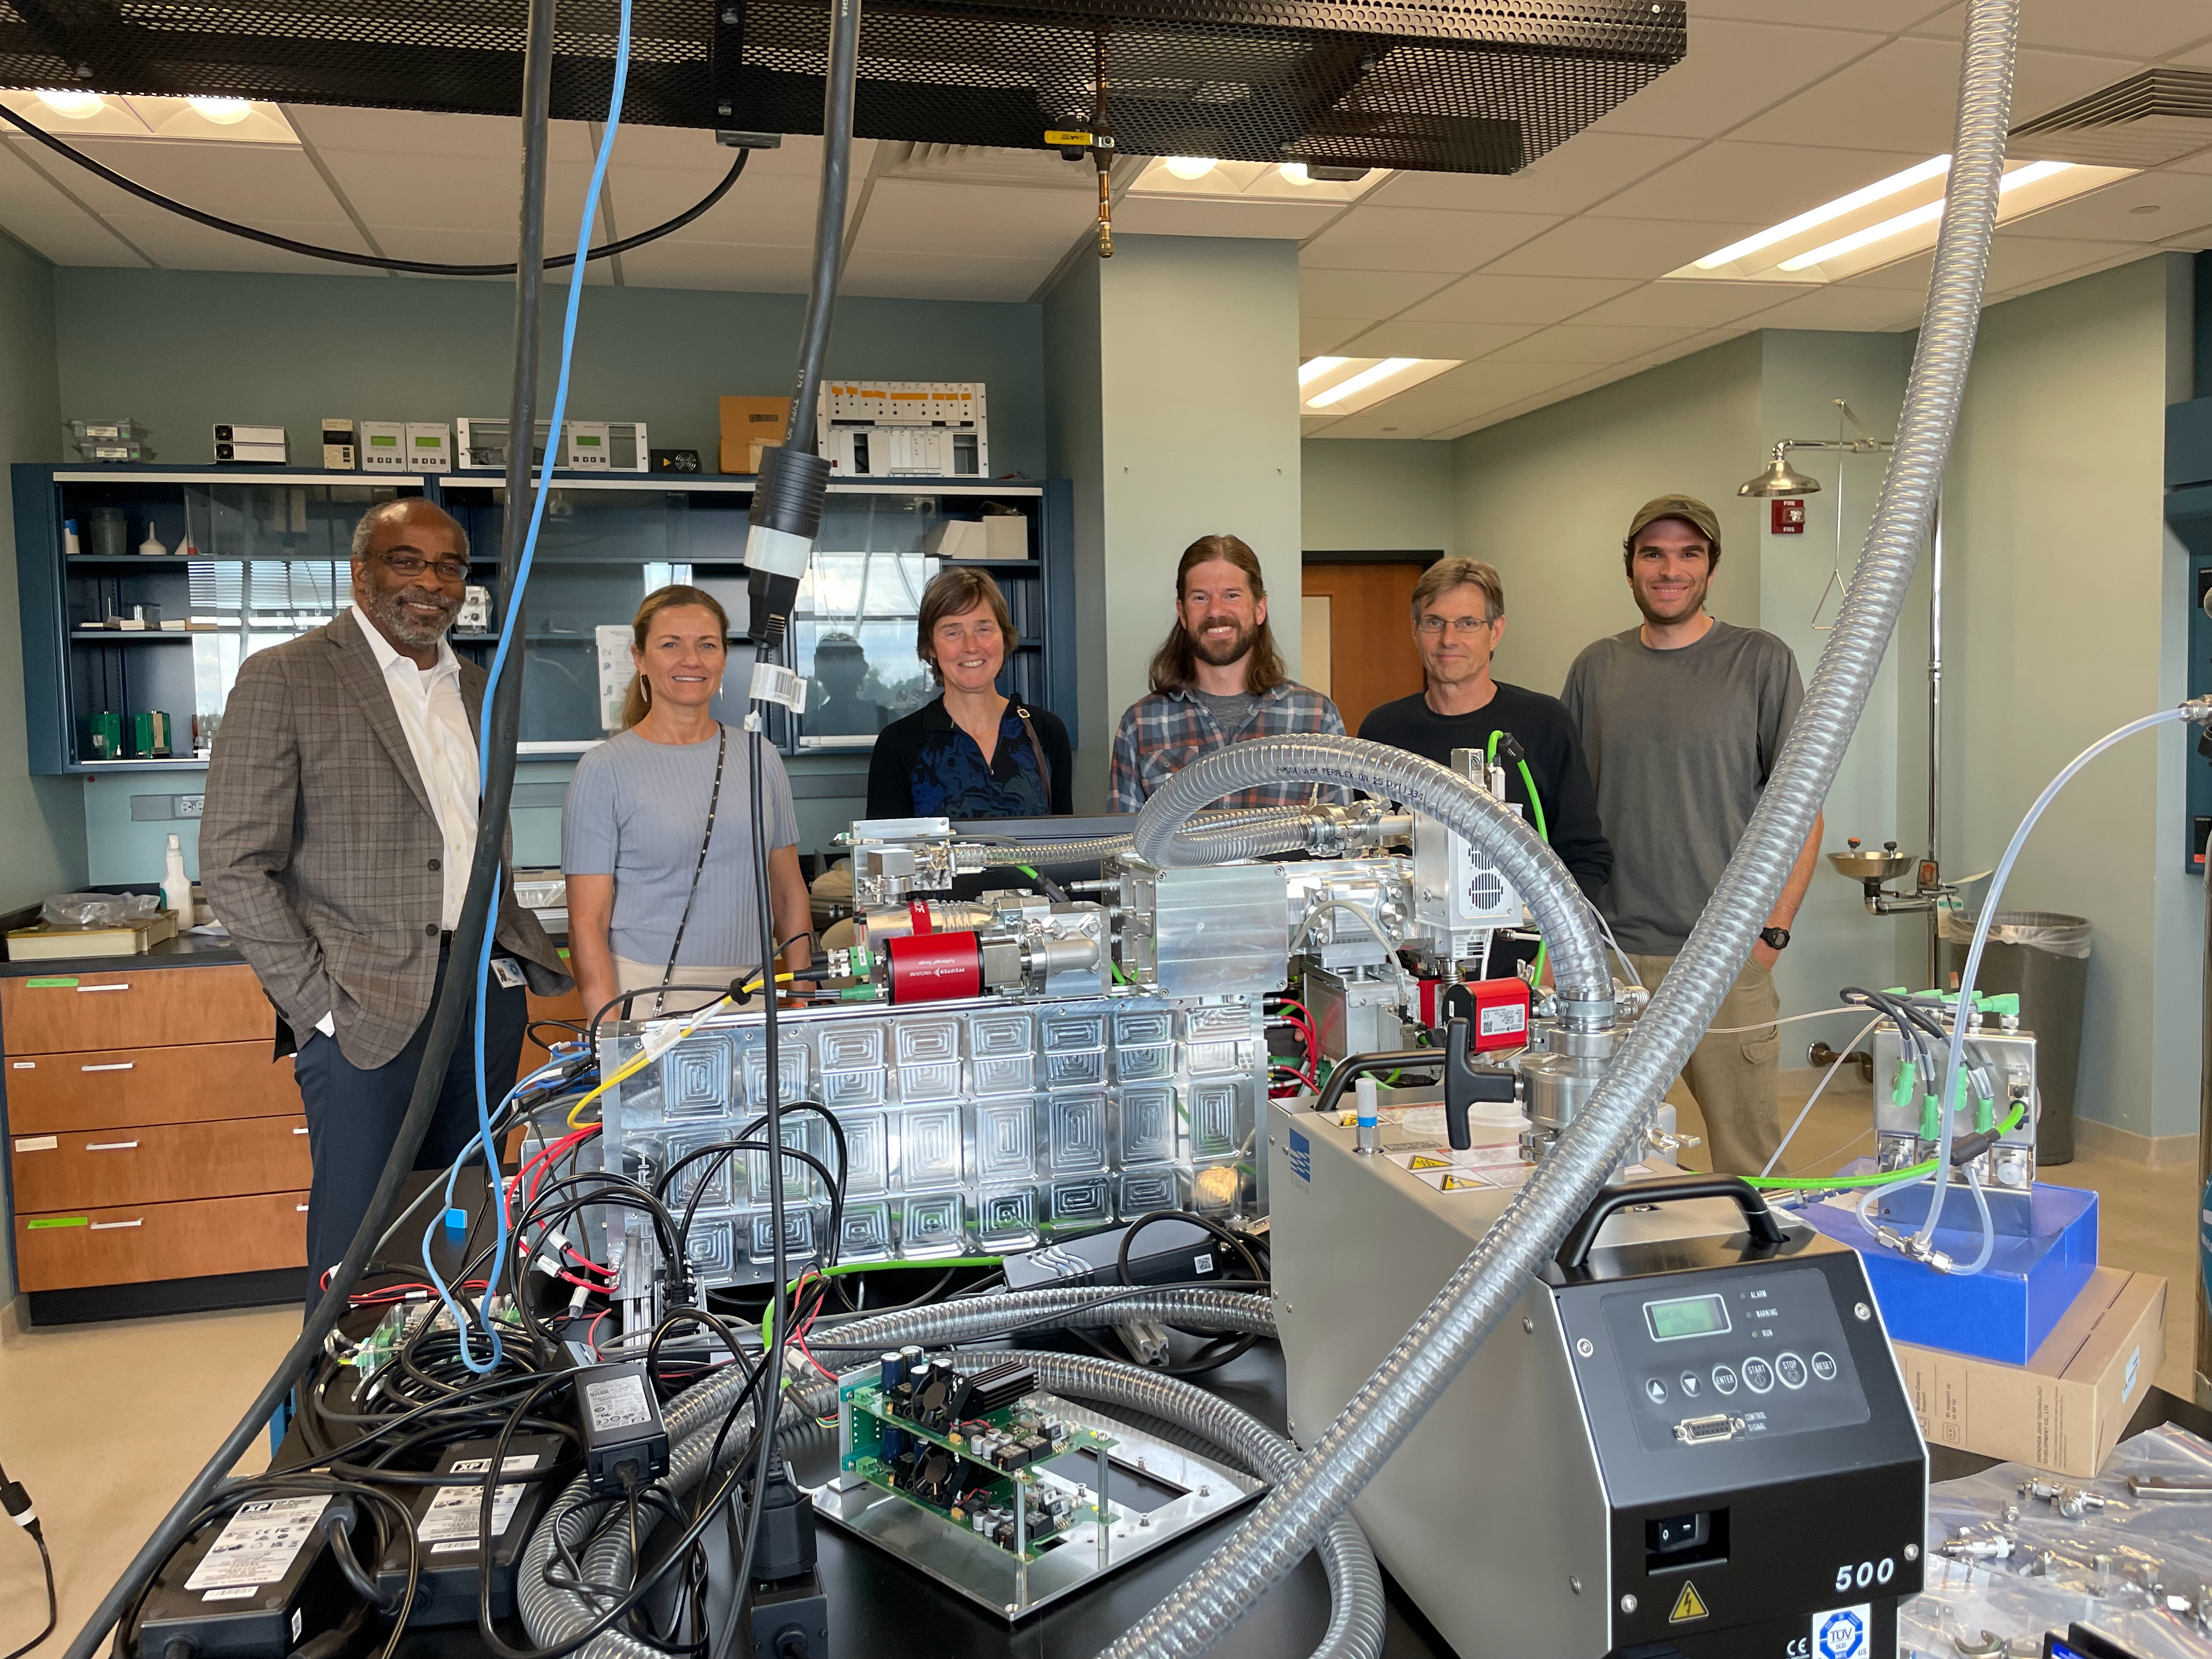 On hand to witness the already functioning instrument were, pictured left to right: NCAR Director Everette Joseph (host), Anne Johansen, ACOM Director Pieternel Levelt, Brett Palm (APROC Project lead), Eric Apel, and Kyle Zarzana (APROC scientist).